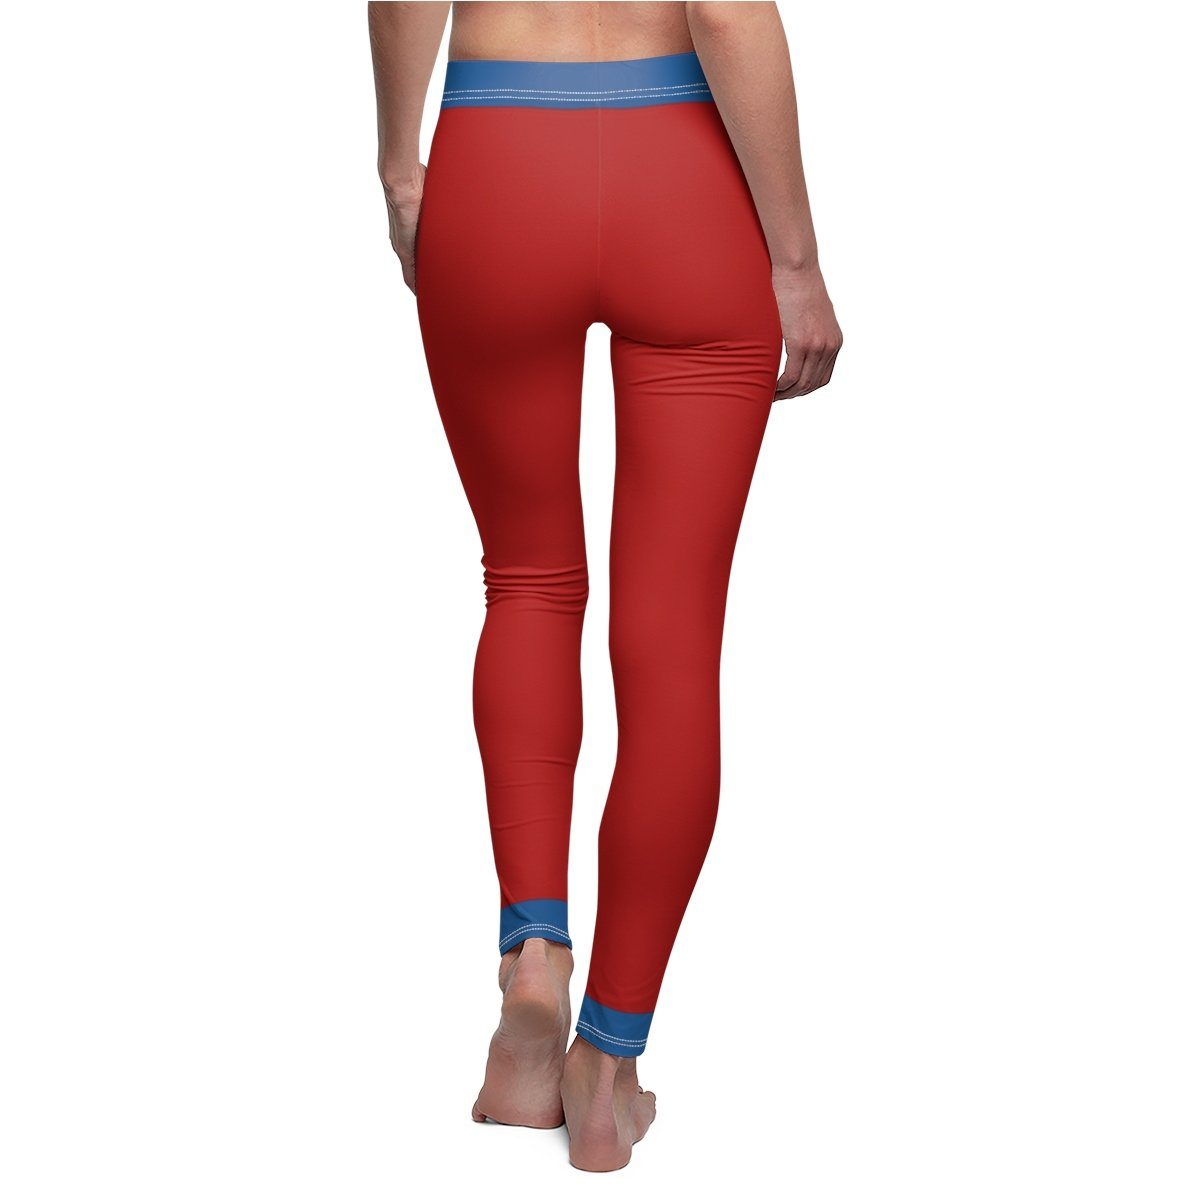 Ice - V.3 - Extreme Sportswear Cut & Sew Leggings Template-Photoshop Template - Photo Solutions